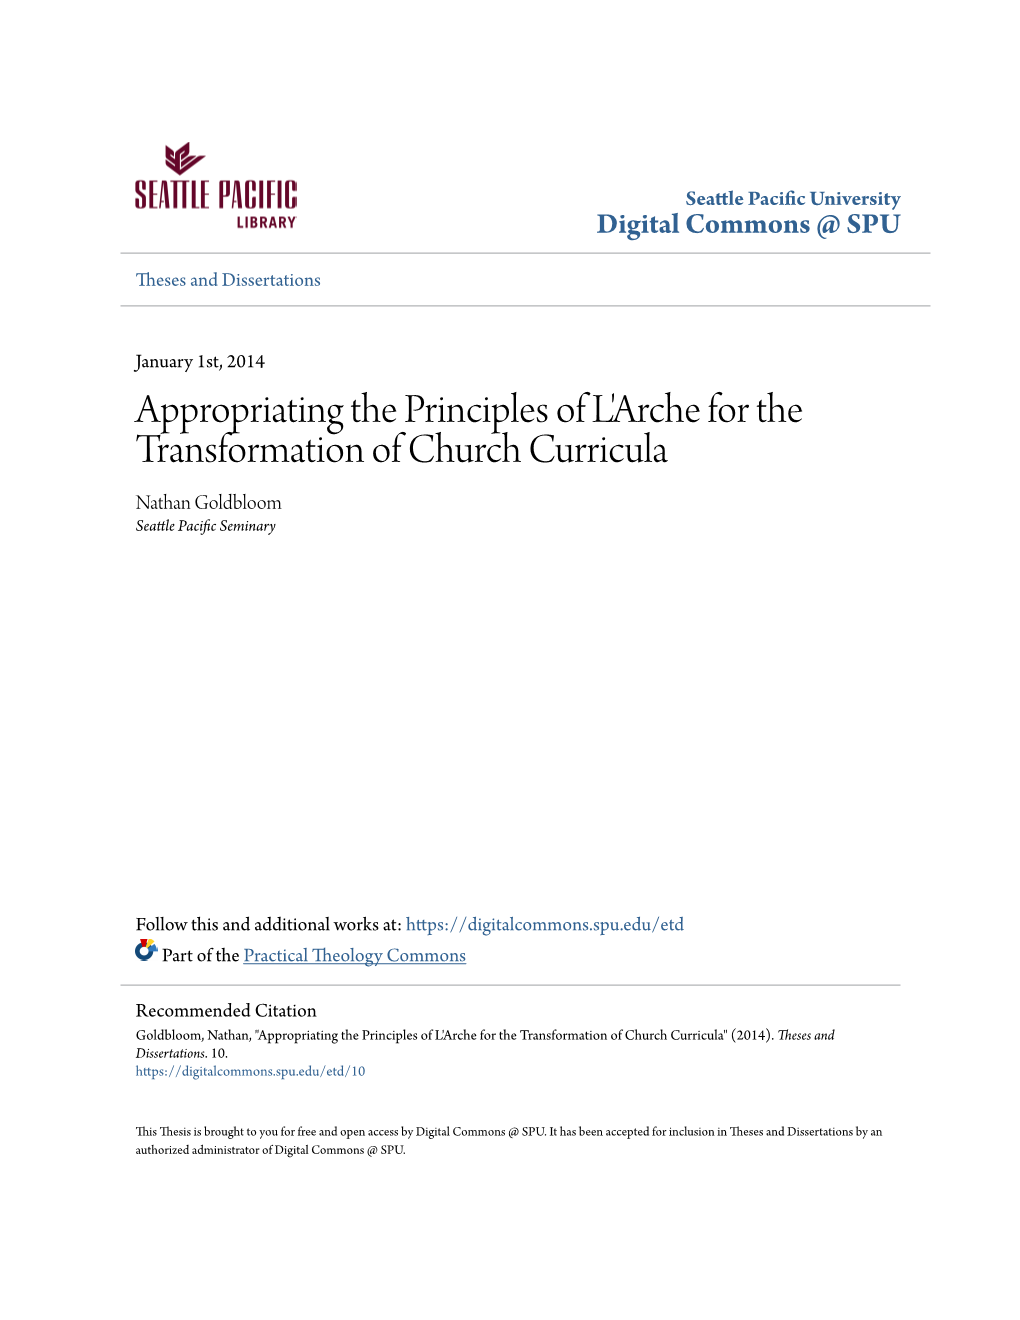 Appropriating the Principles of L'arche for the Transformation of Church Curricula Nathan Goldbloom Seattle Pacific Seminary